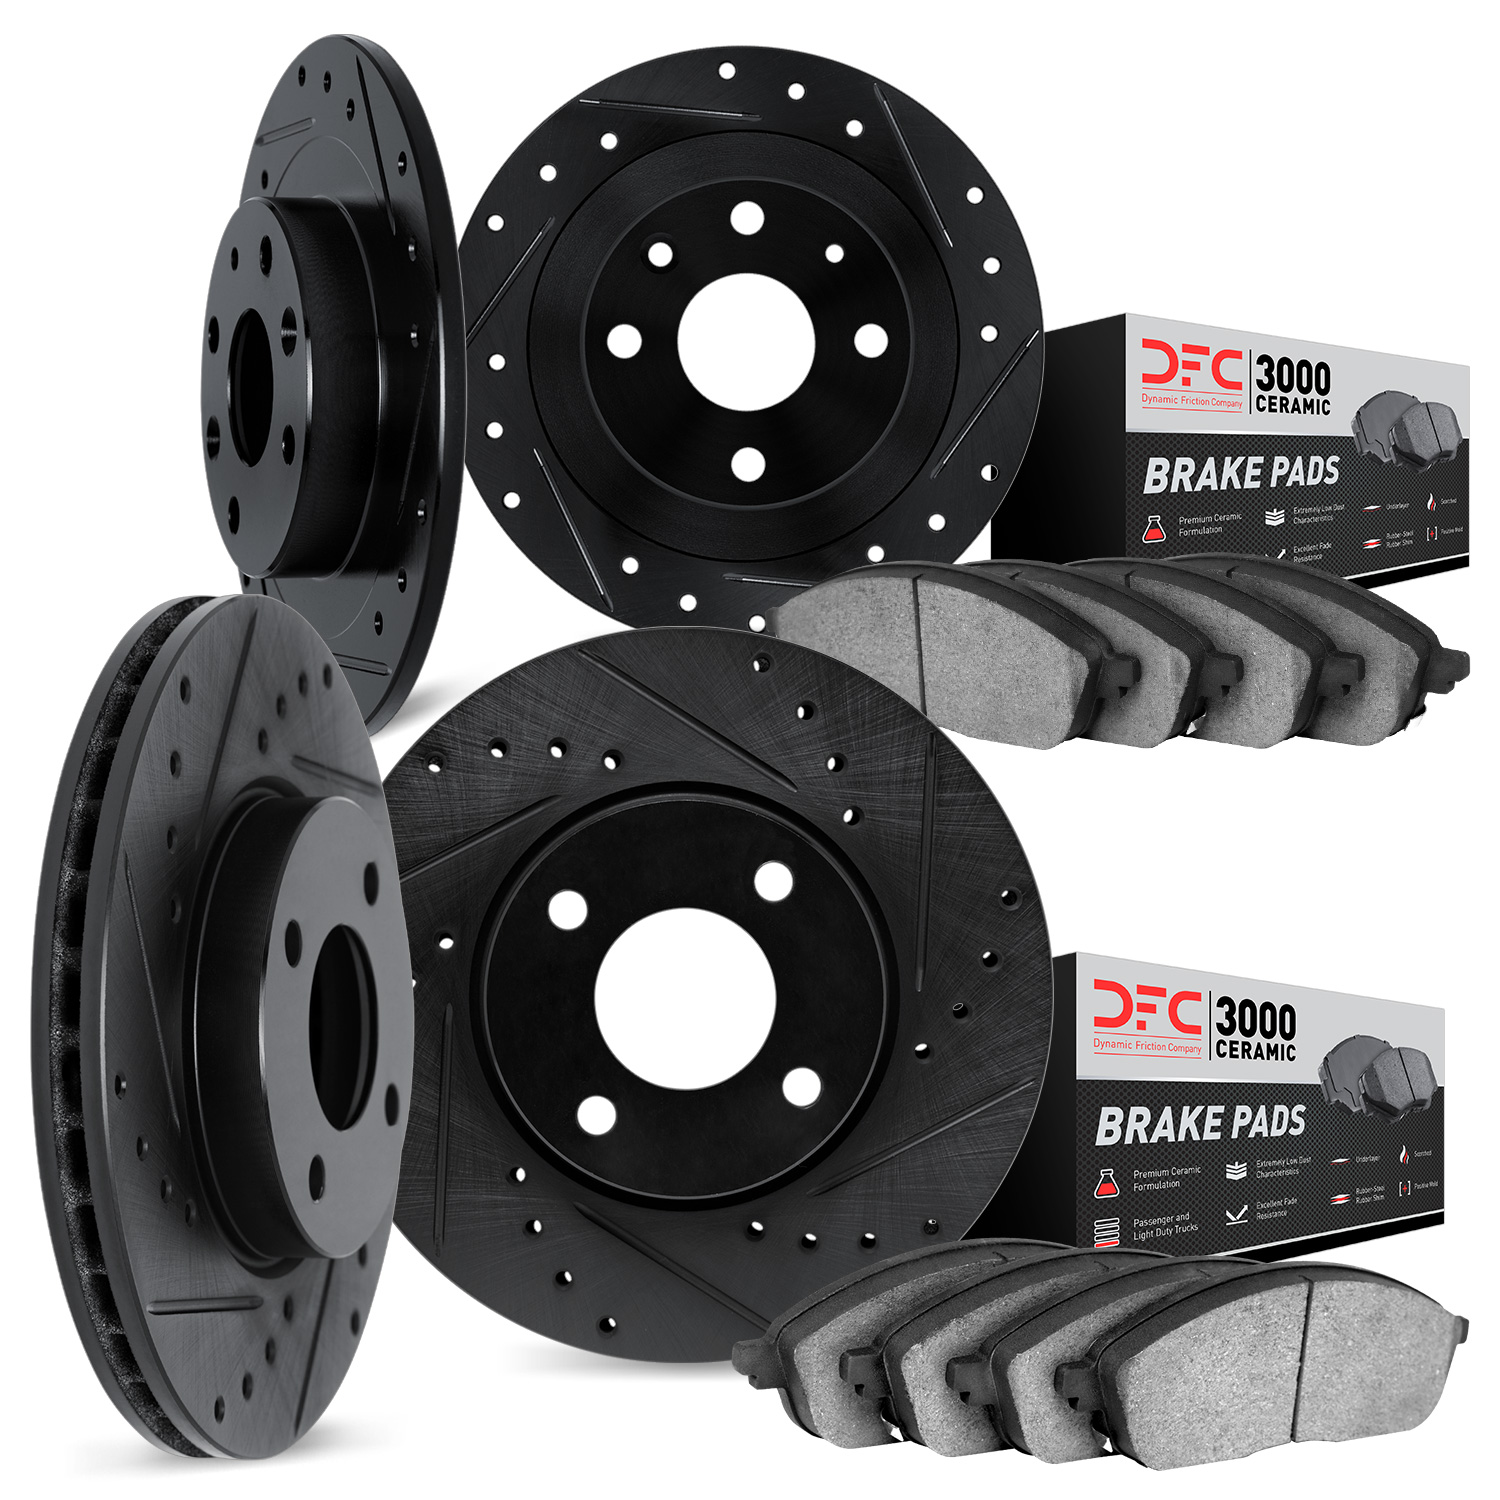 8304-59002 Drilled/Slotted Brake Rotors with 3000-Series Ceramic Brake Pads Kit [Black], 1994-1995 Acura/Honda, Position: Front